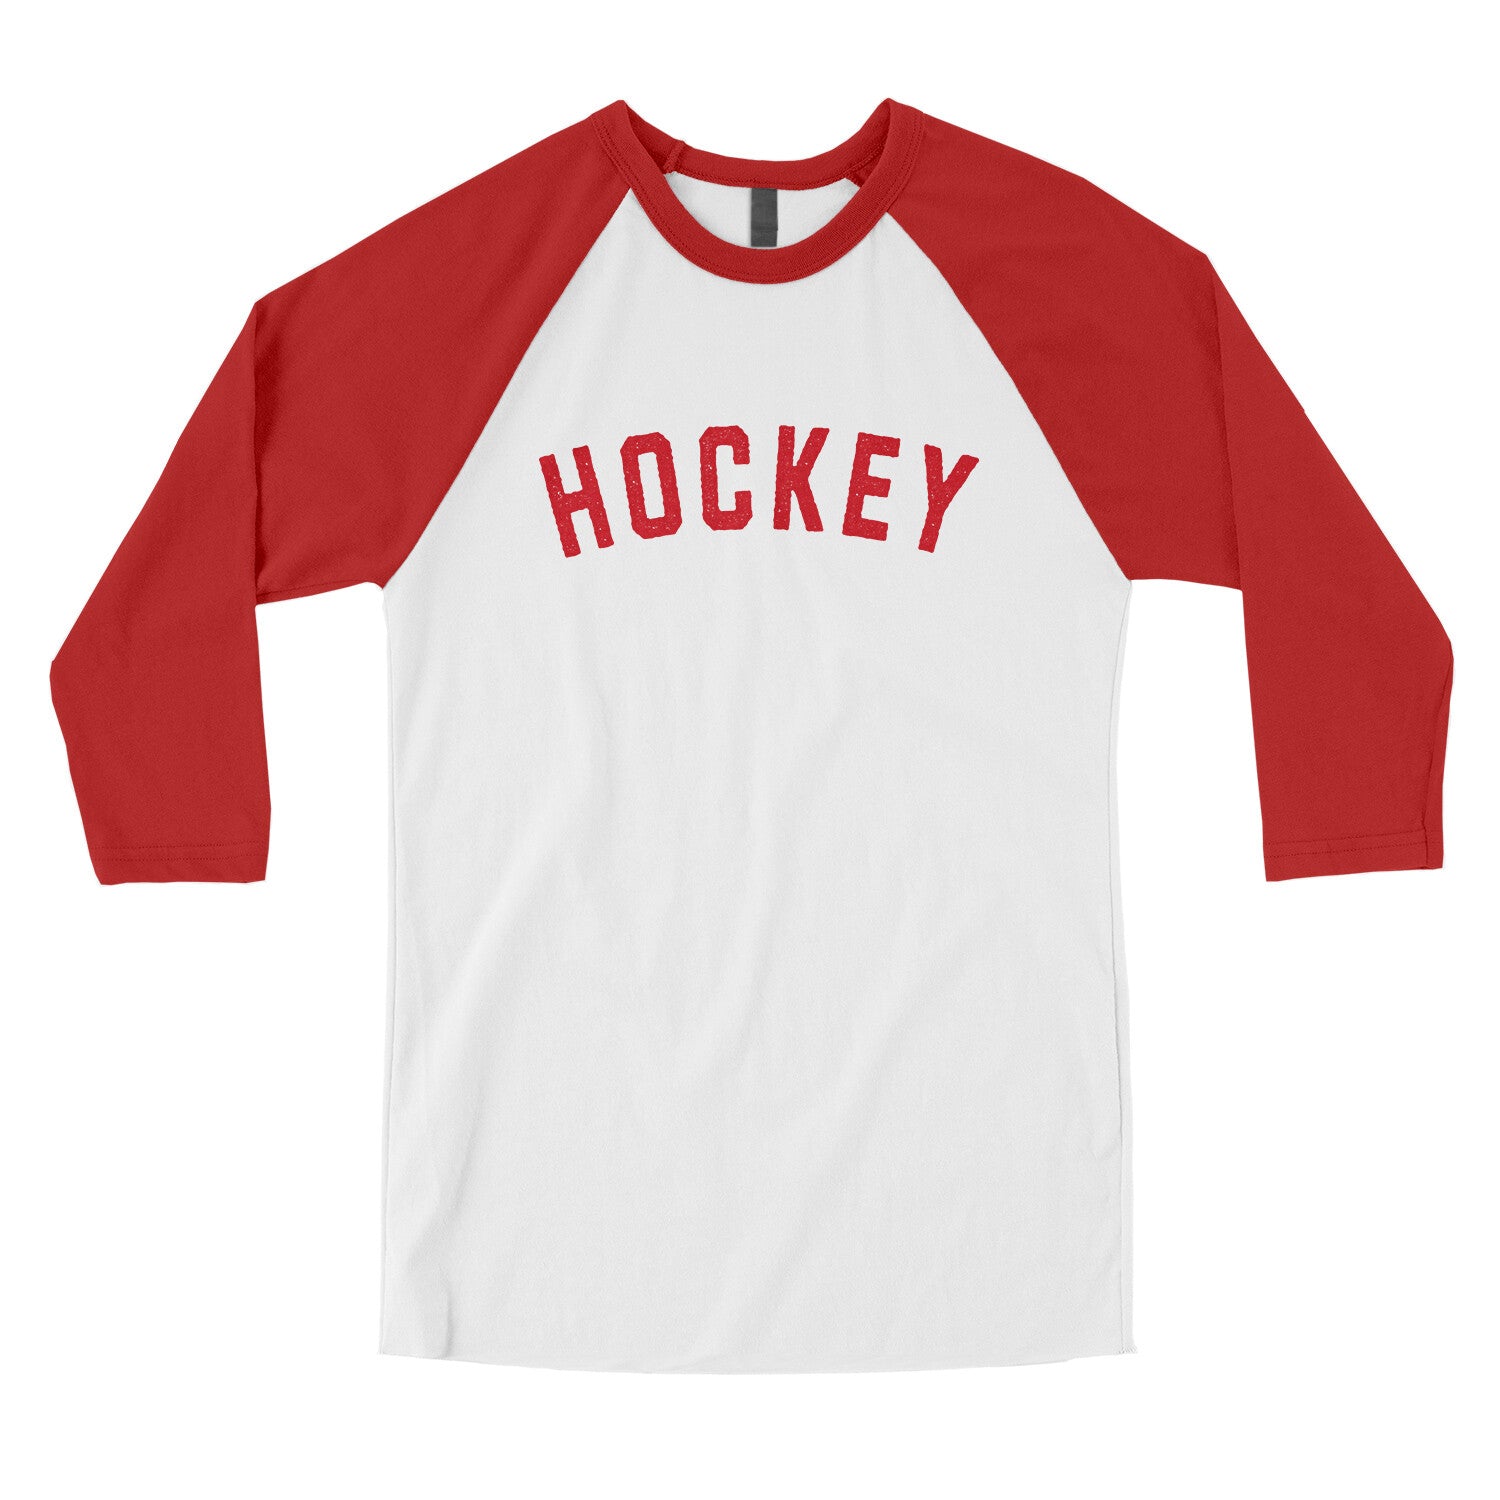 Hockey in White with Red Color